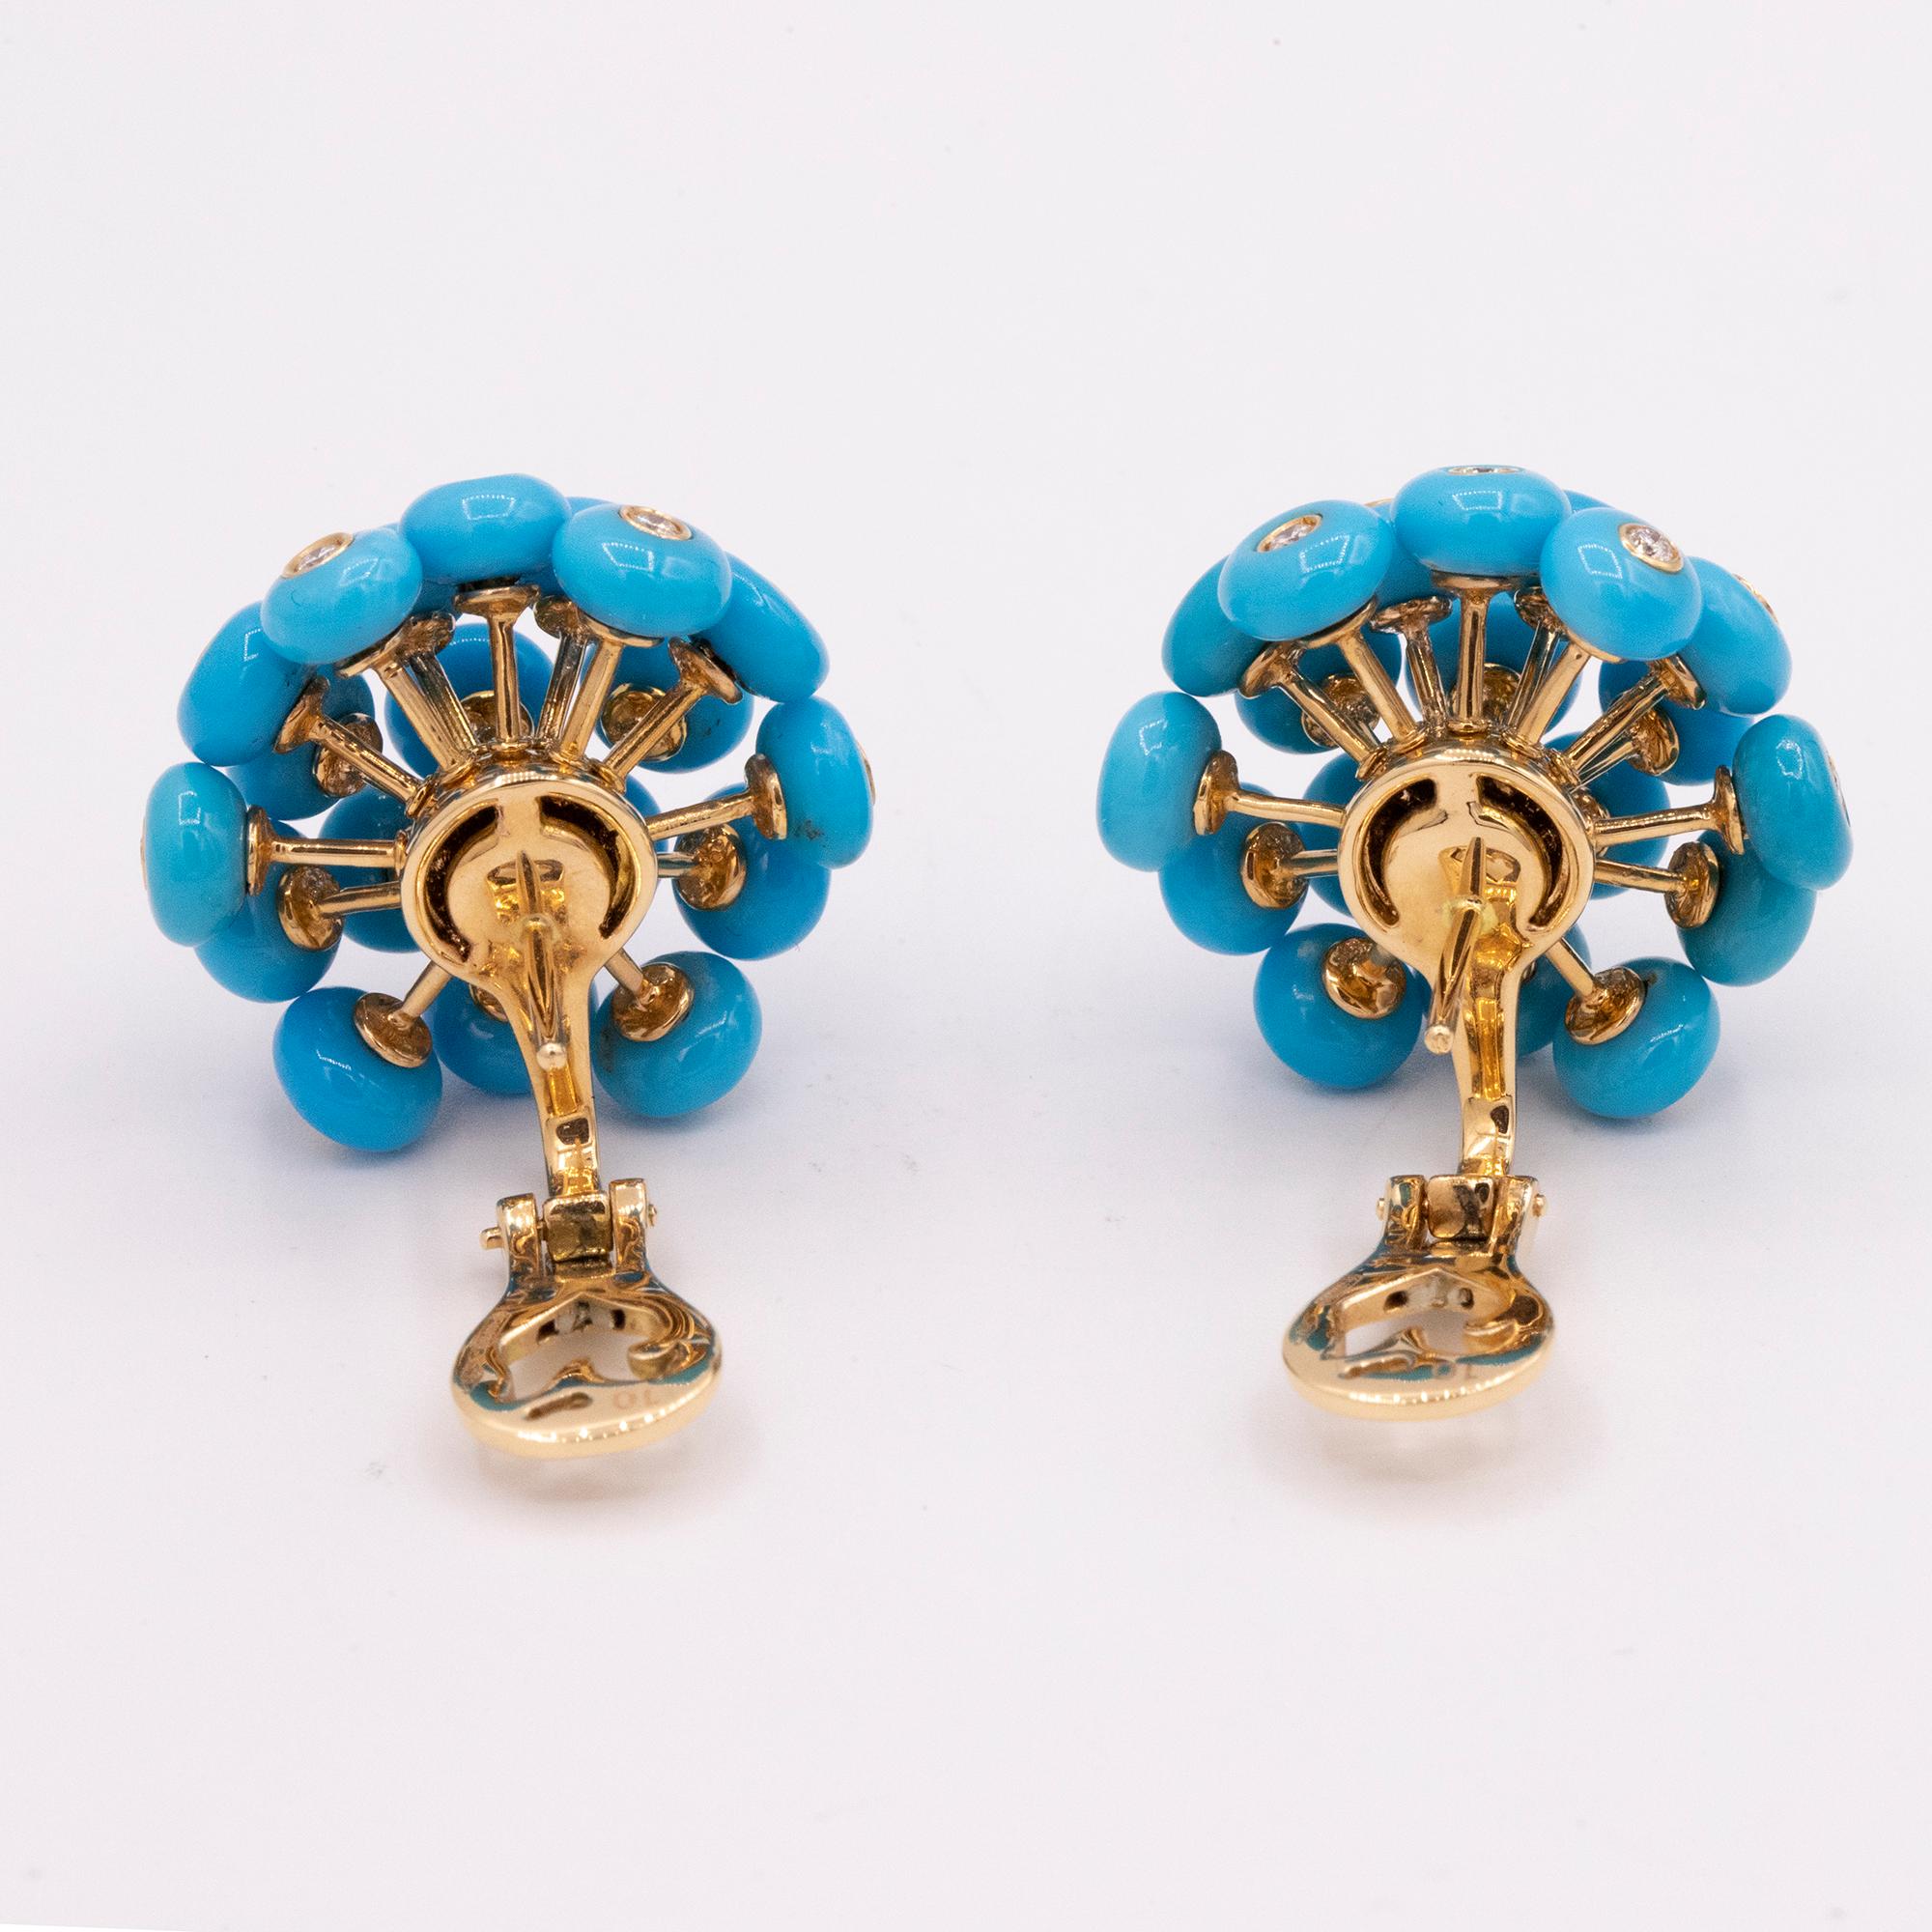 Contemporary Chantecler Dandelion 18 Karat Gold and Turquoise Earrings